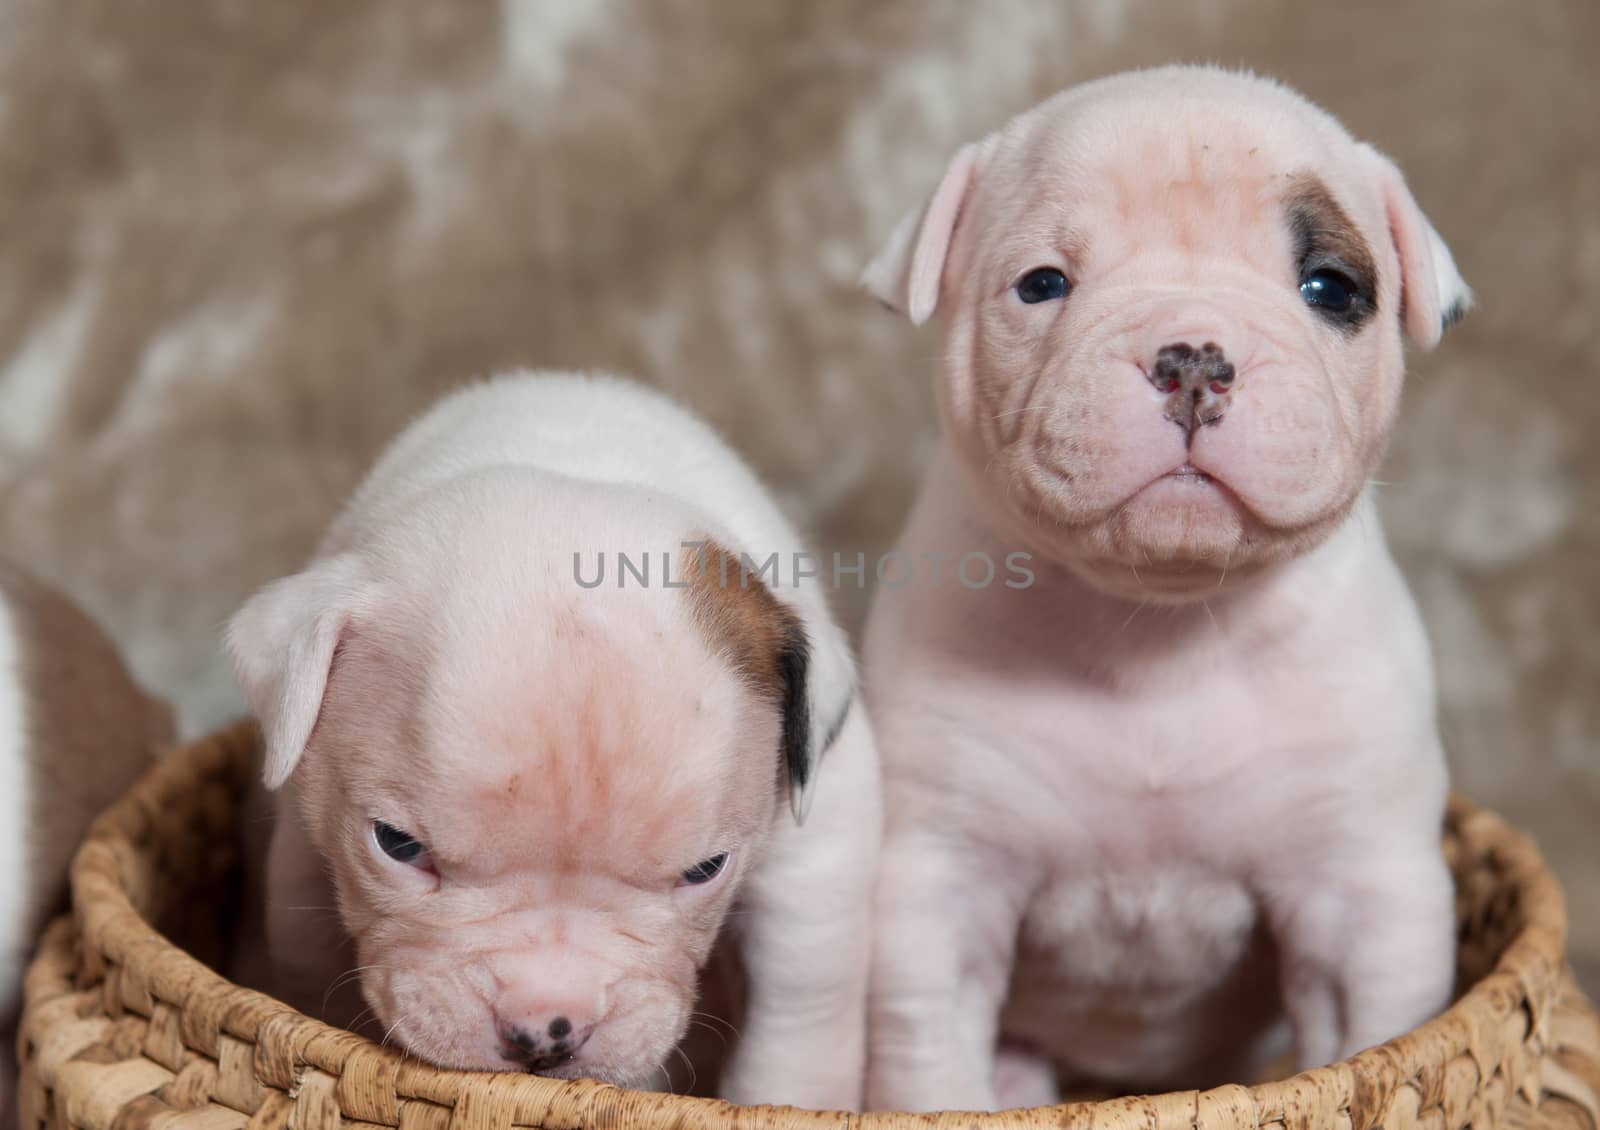 Two small American Bulldog puppies on light background in the basket